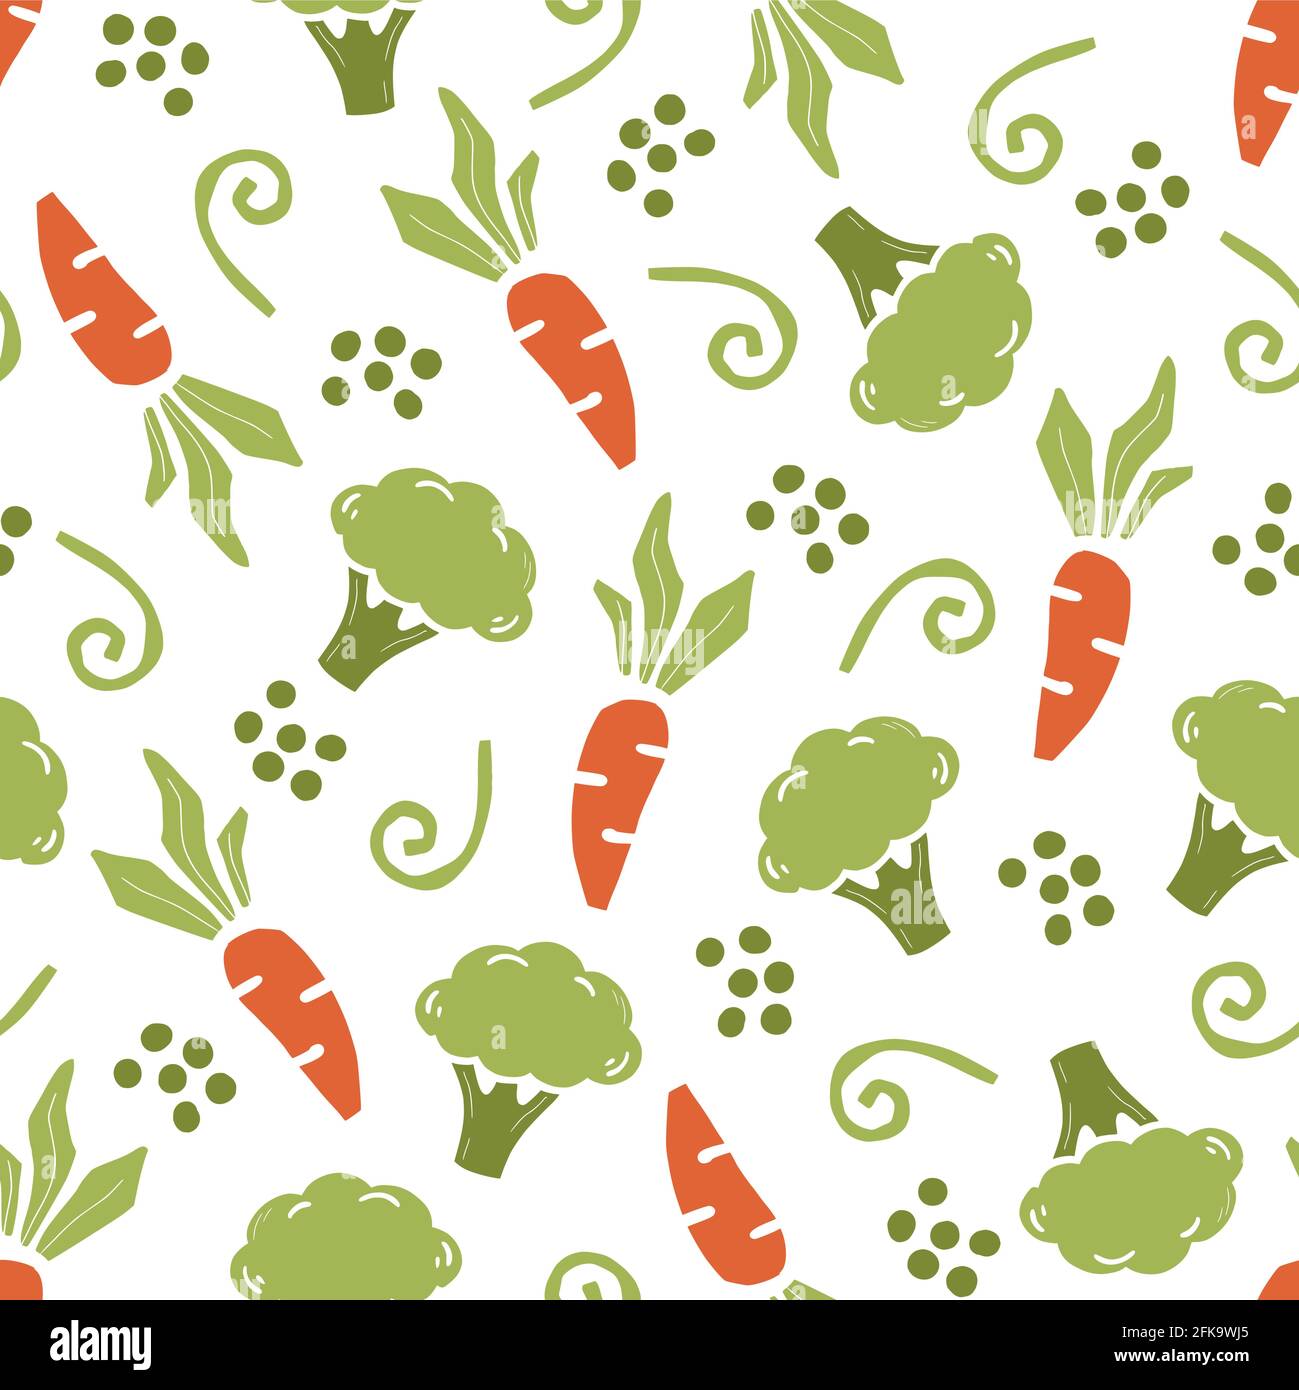 Hand drawn seamless pattern of simple broccoli, carrot. Doodle sketch style. Vegetable pattern for food shop, vegetable wallpaper, background, textile design. Stock Vector